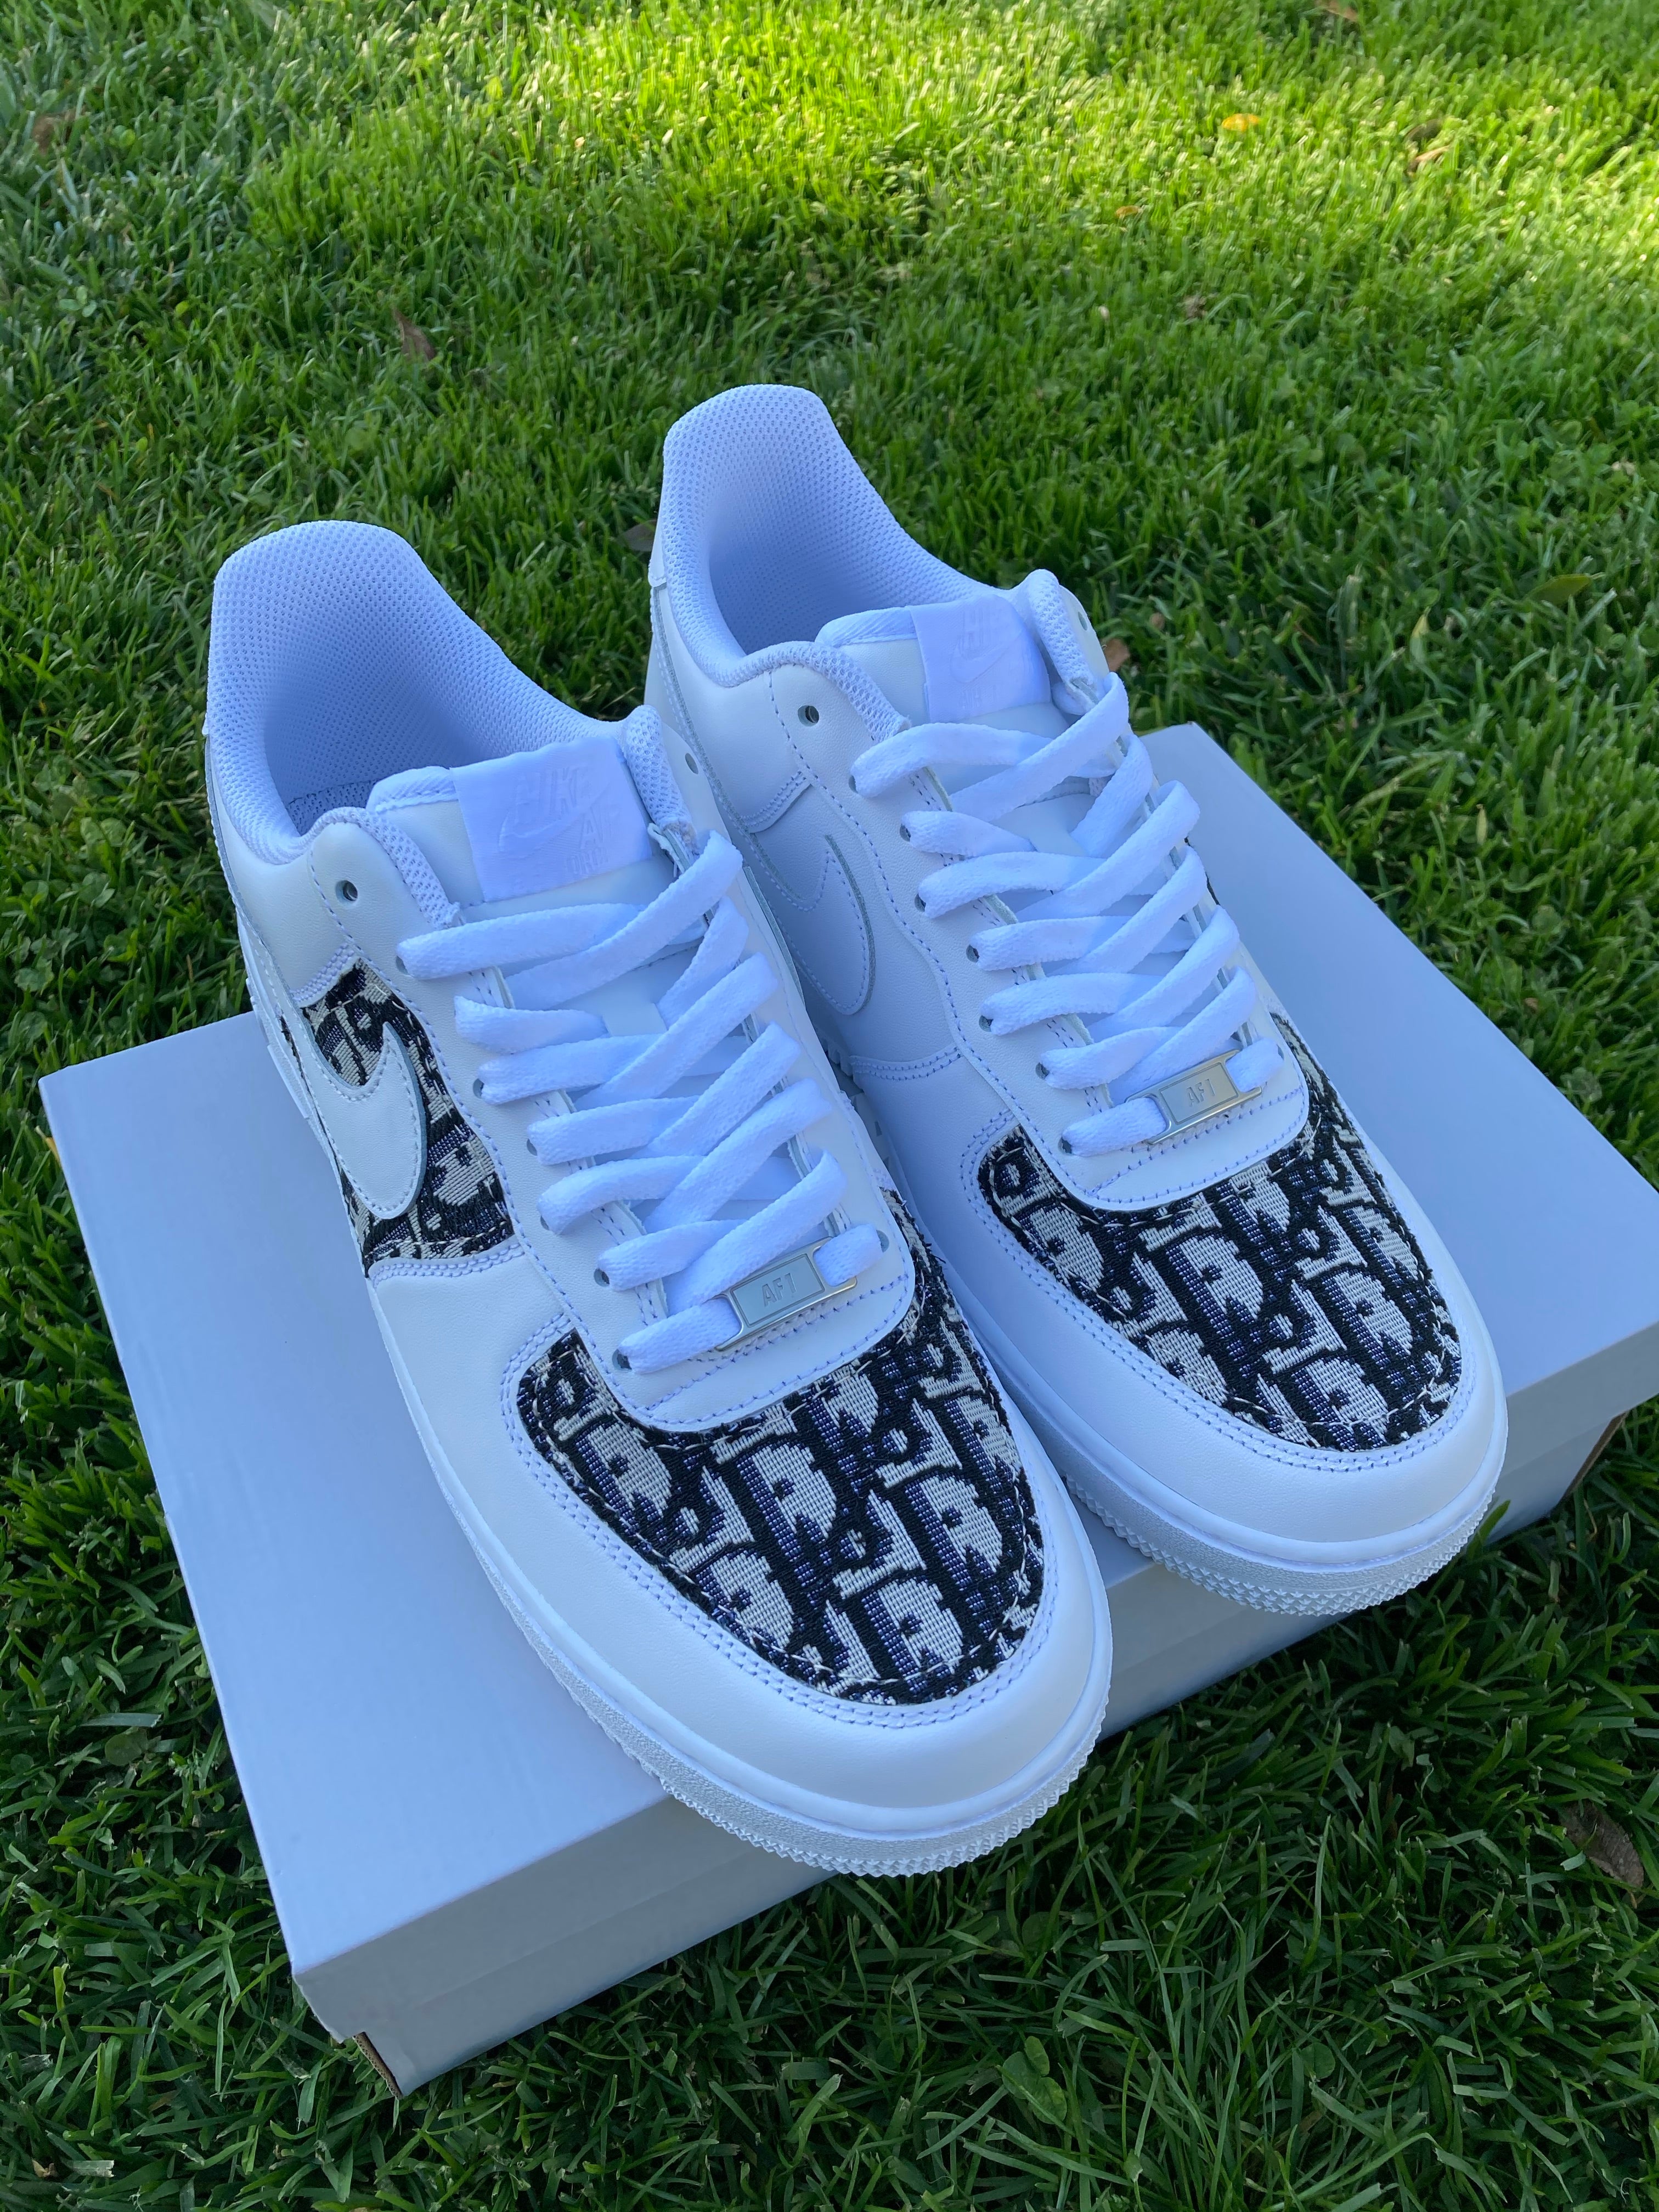 AF1 Dior  Sneakers Custom  Customize your sneakers